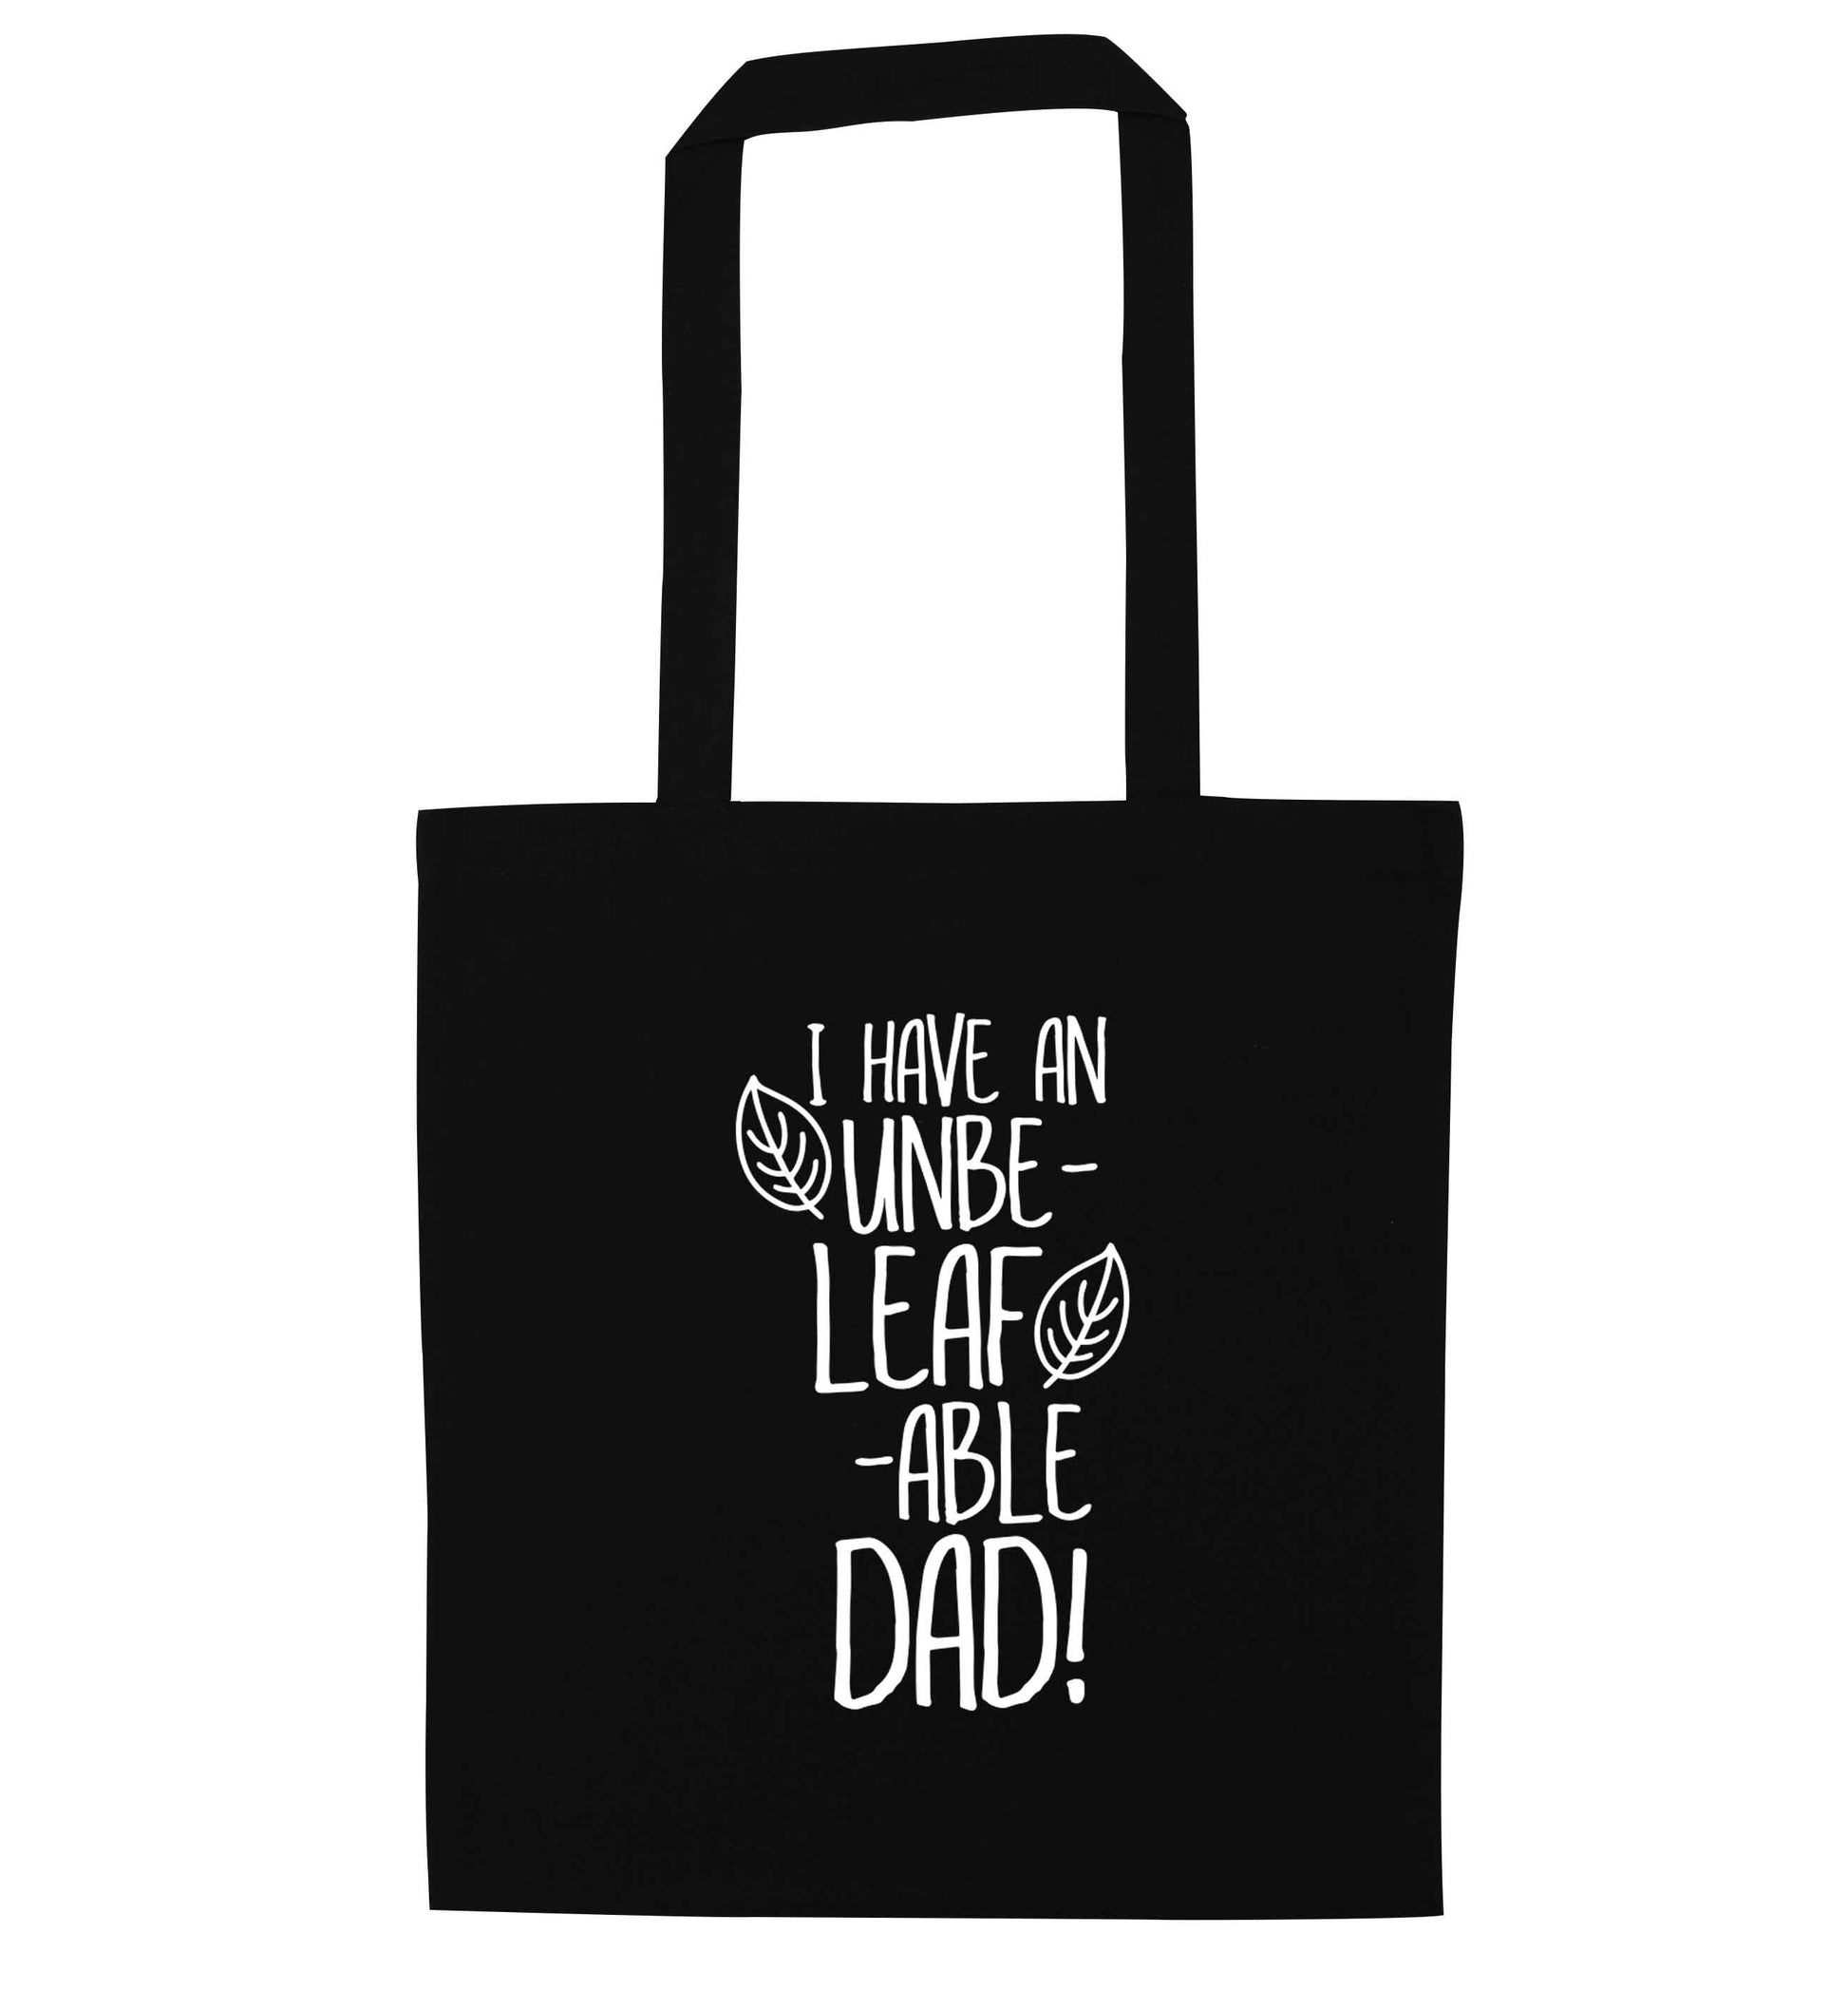 I have an unbe-leaf-able dad black tote bag